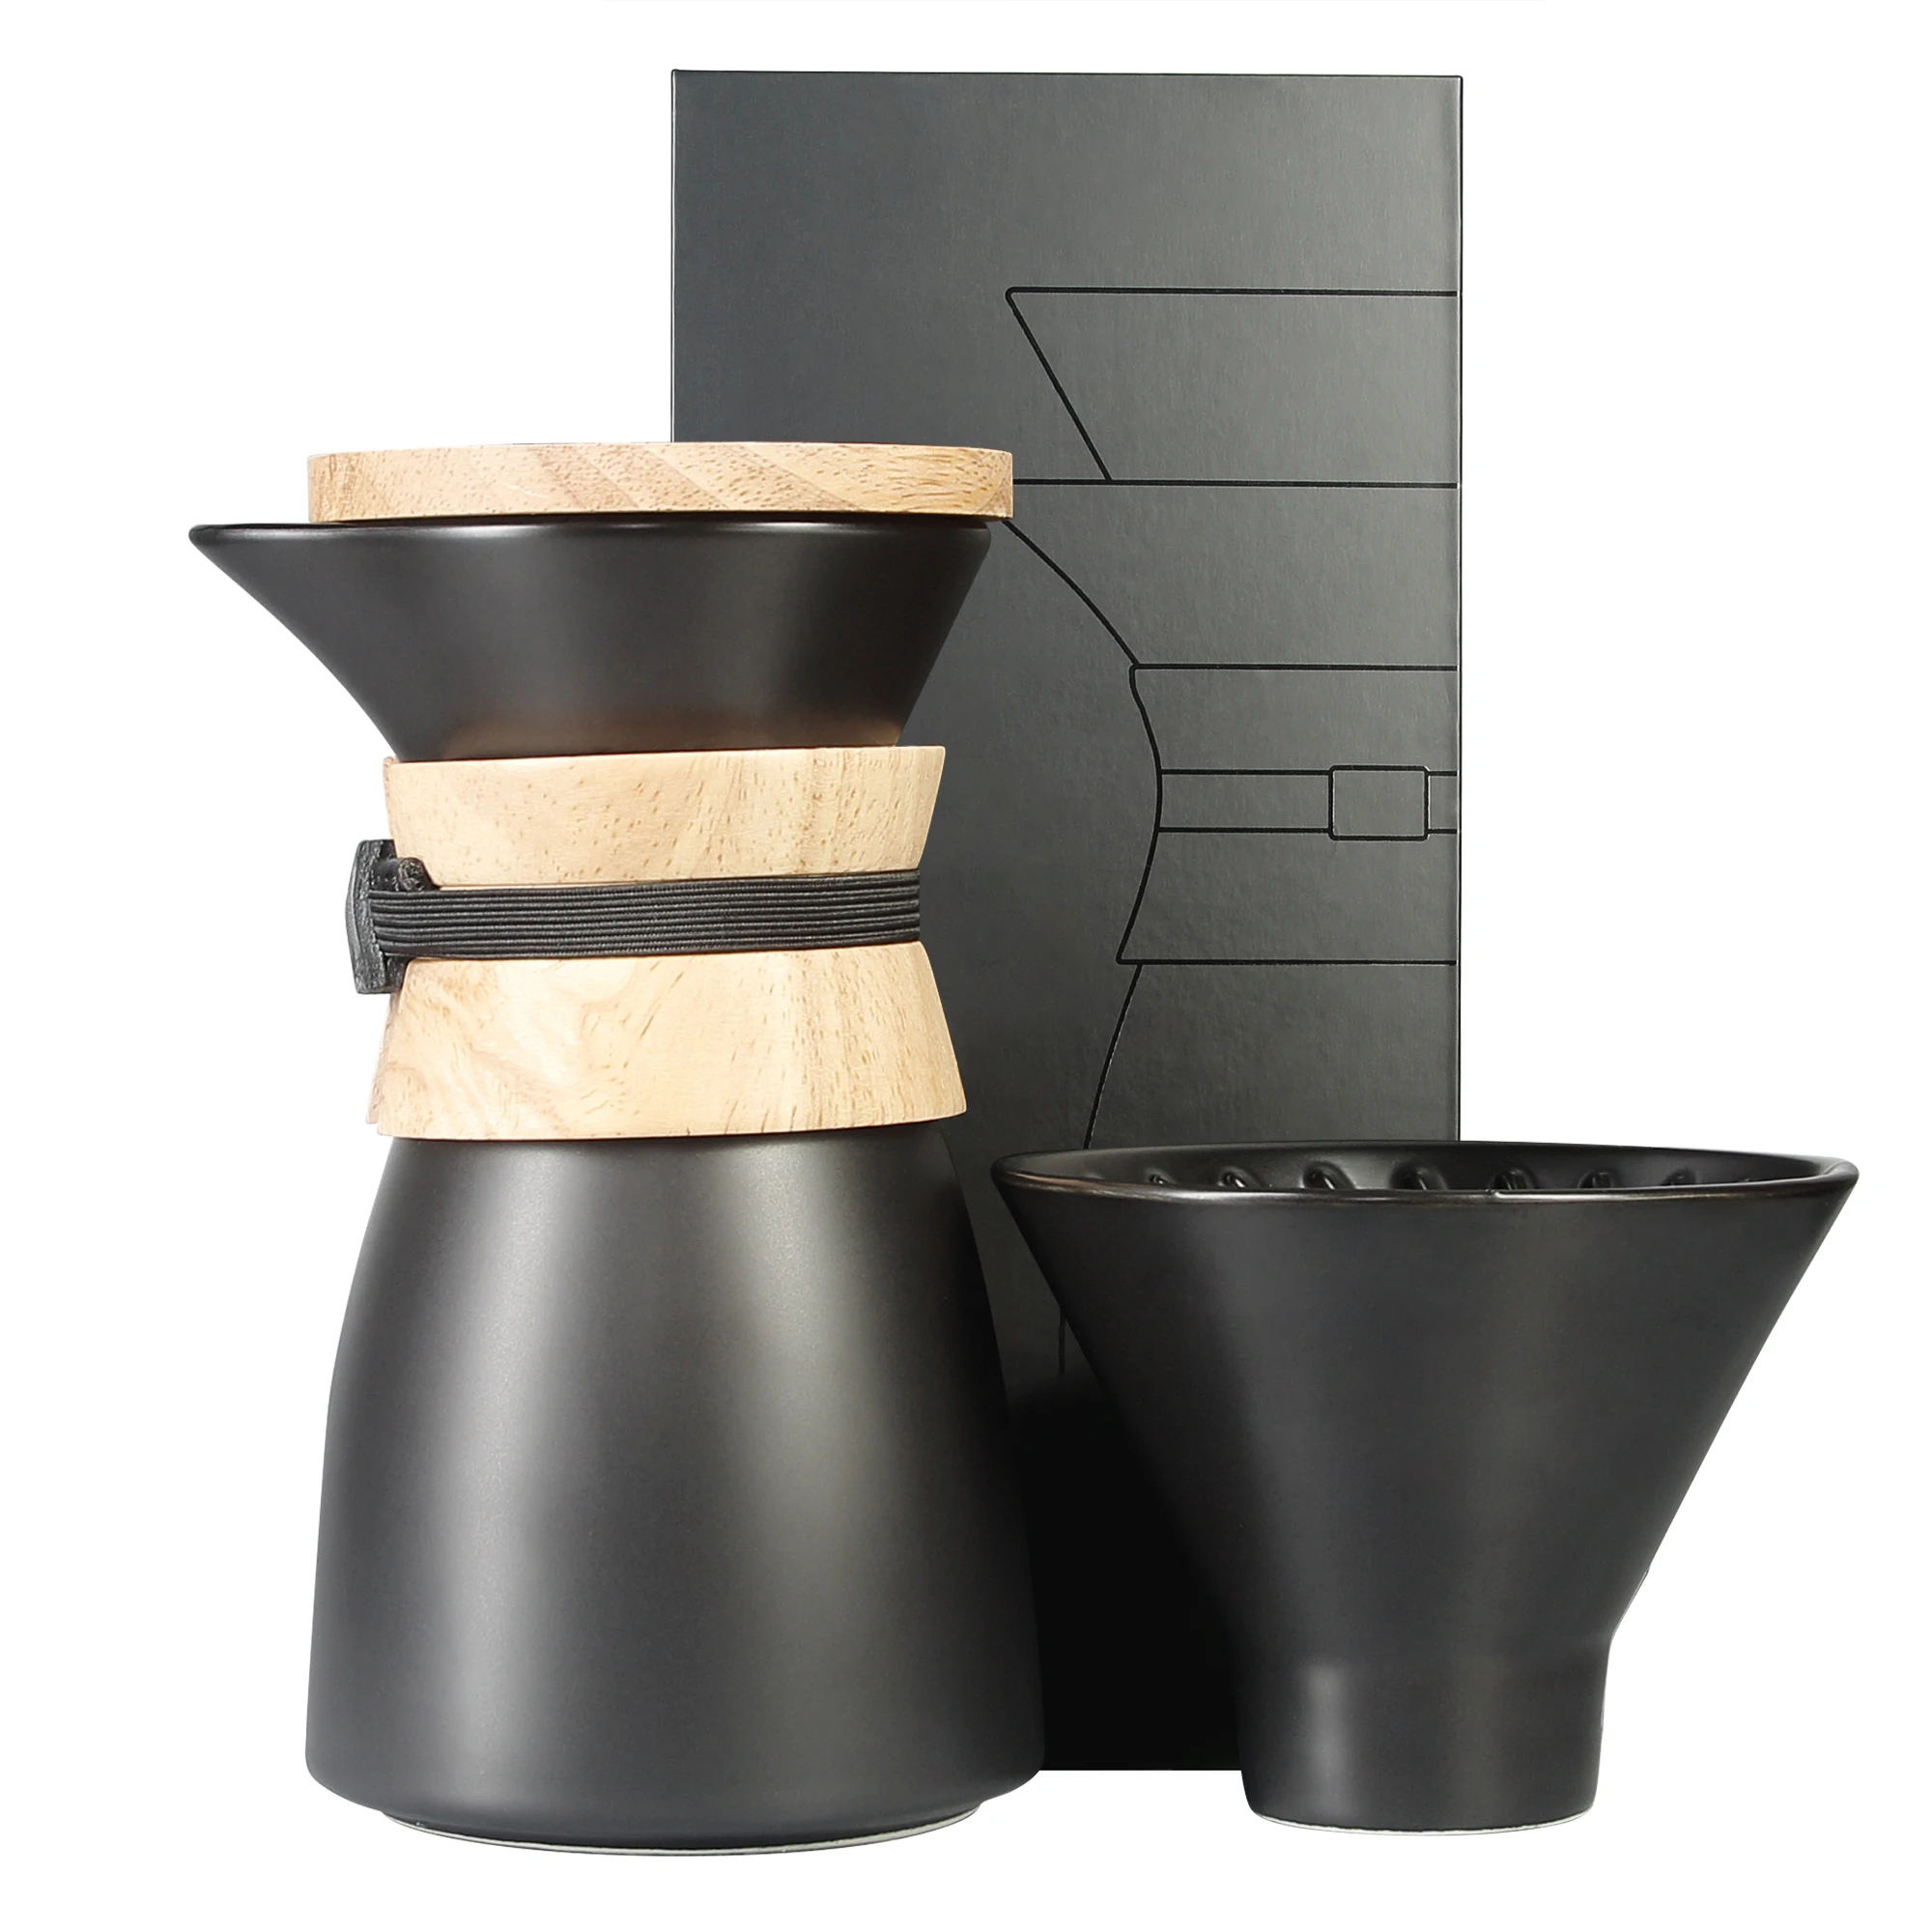 

DHPO Hot-selling Luxury Ceramic Black Pour Over Coffee Maker Porcelain V60 Coffee Dripper With wooden Lid